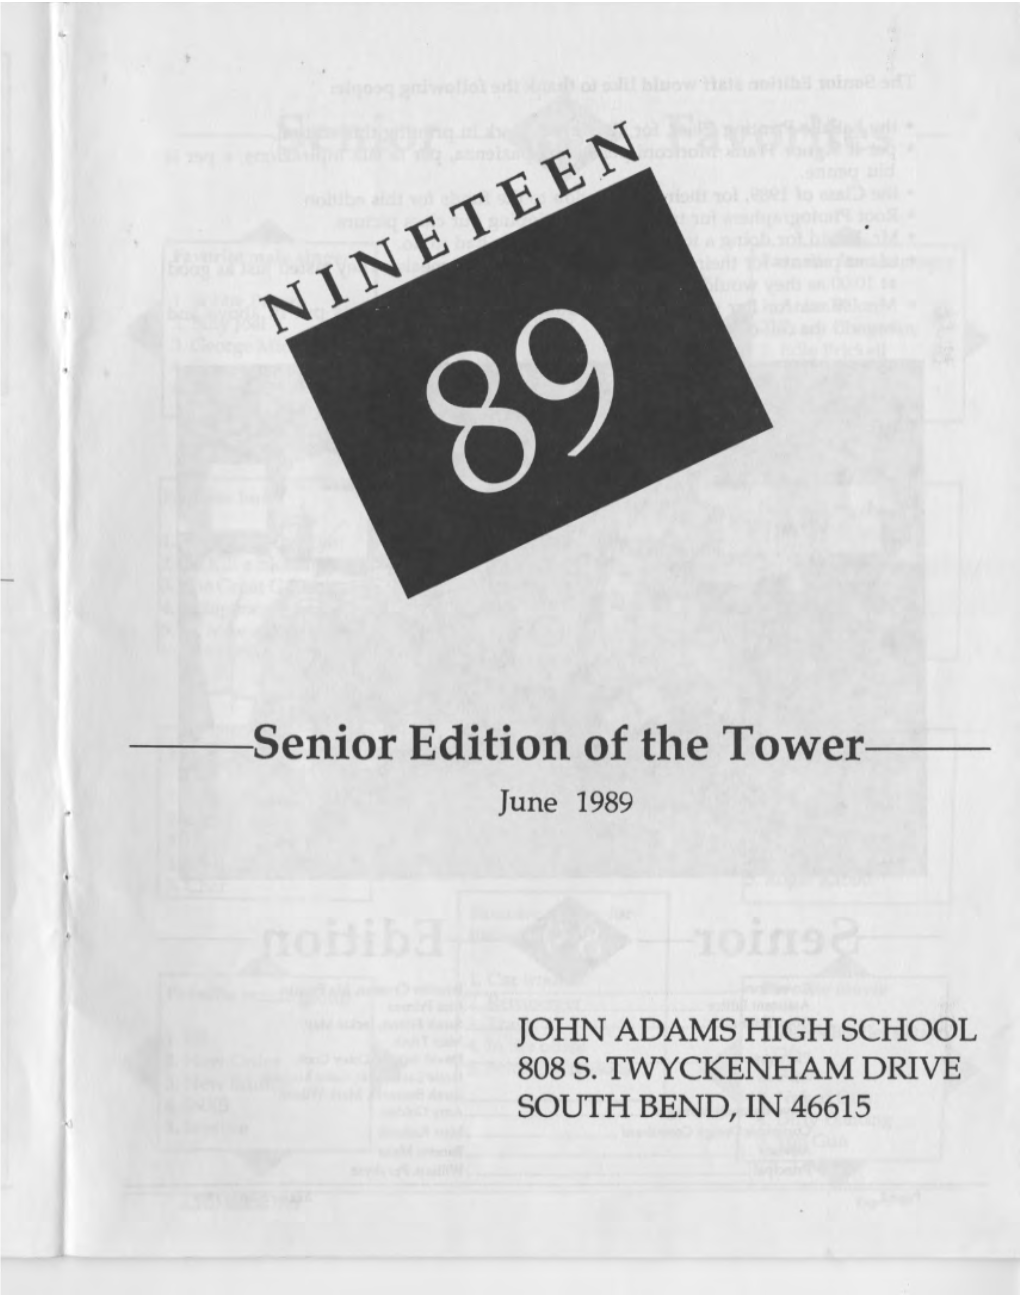 S , Enior Edition of the Tower-­ June 1989